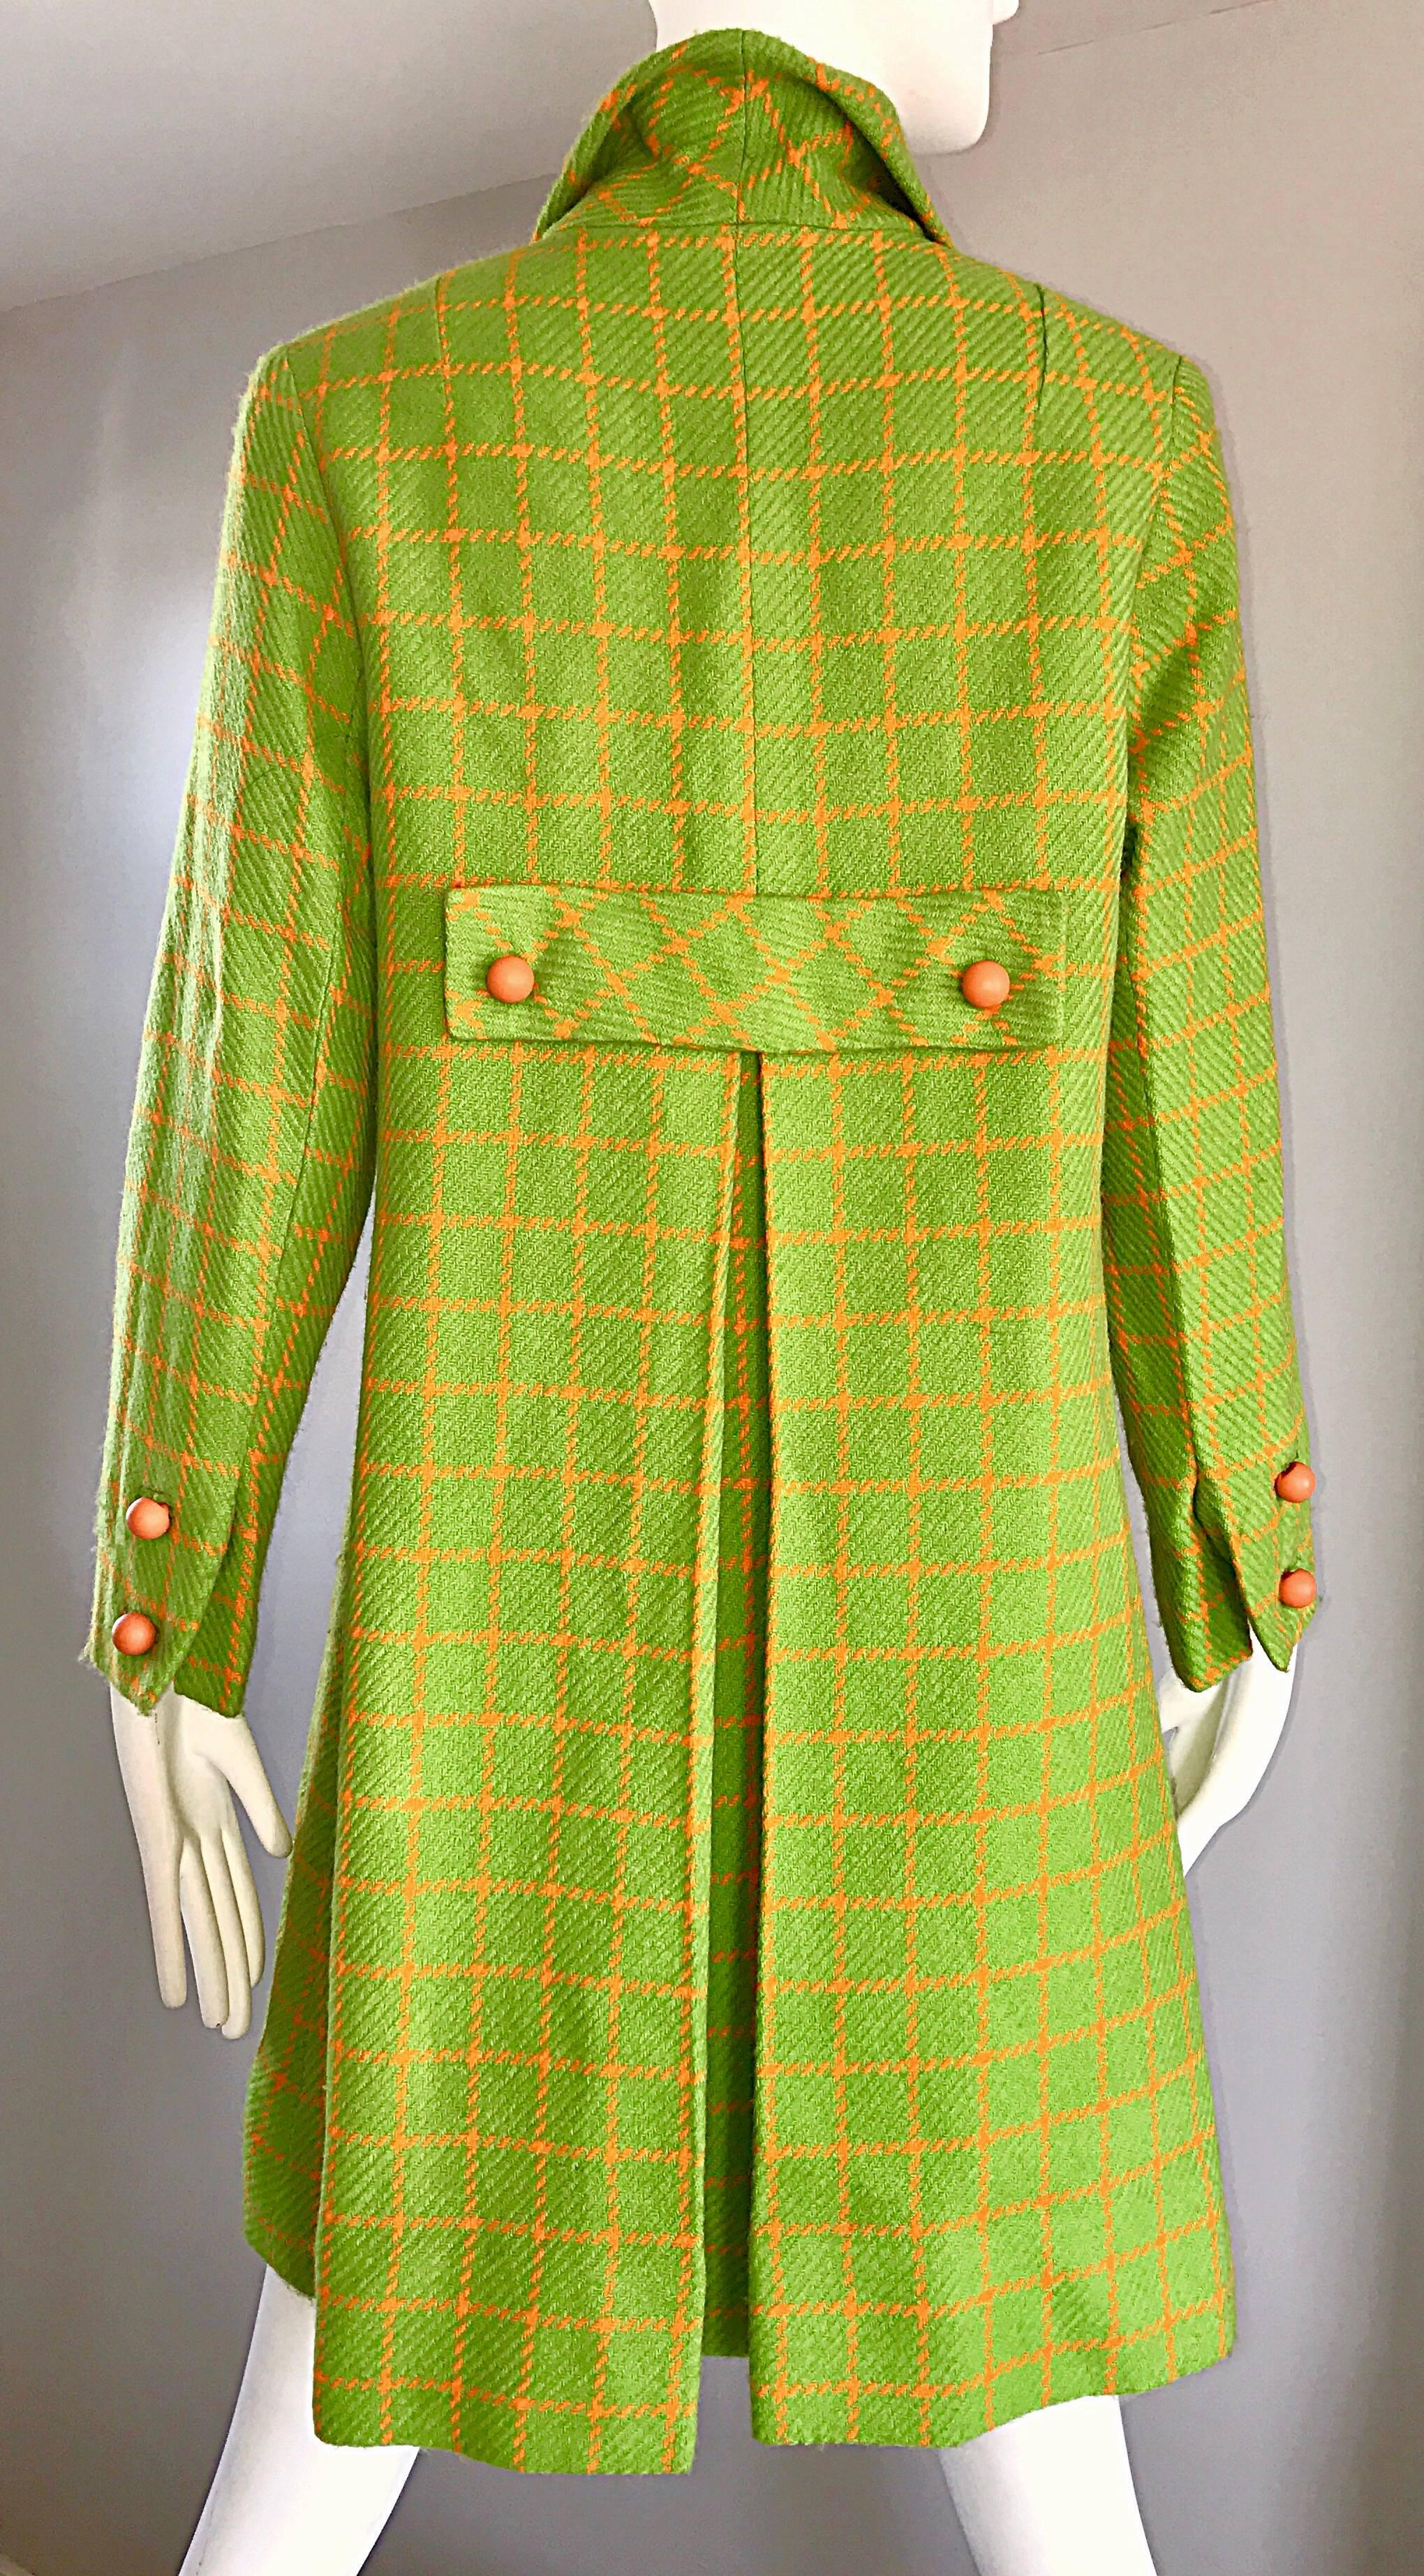 Women's 1960s Neon Lime Green and Orange Checkered Vintage 60s Wool Swing Jacket Coat